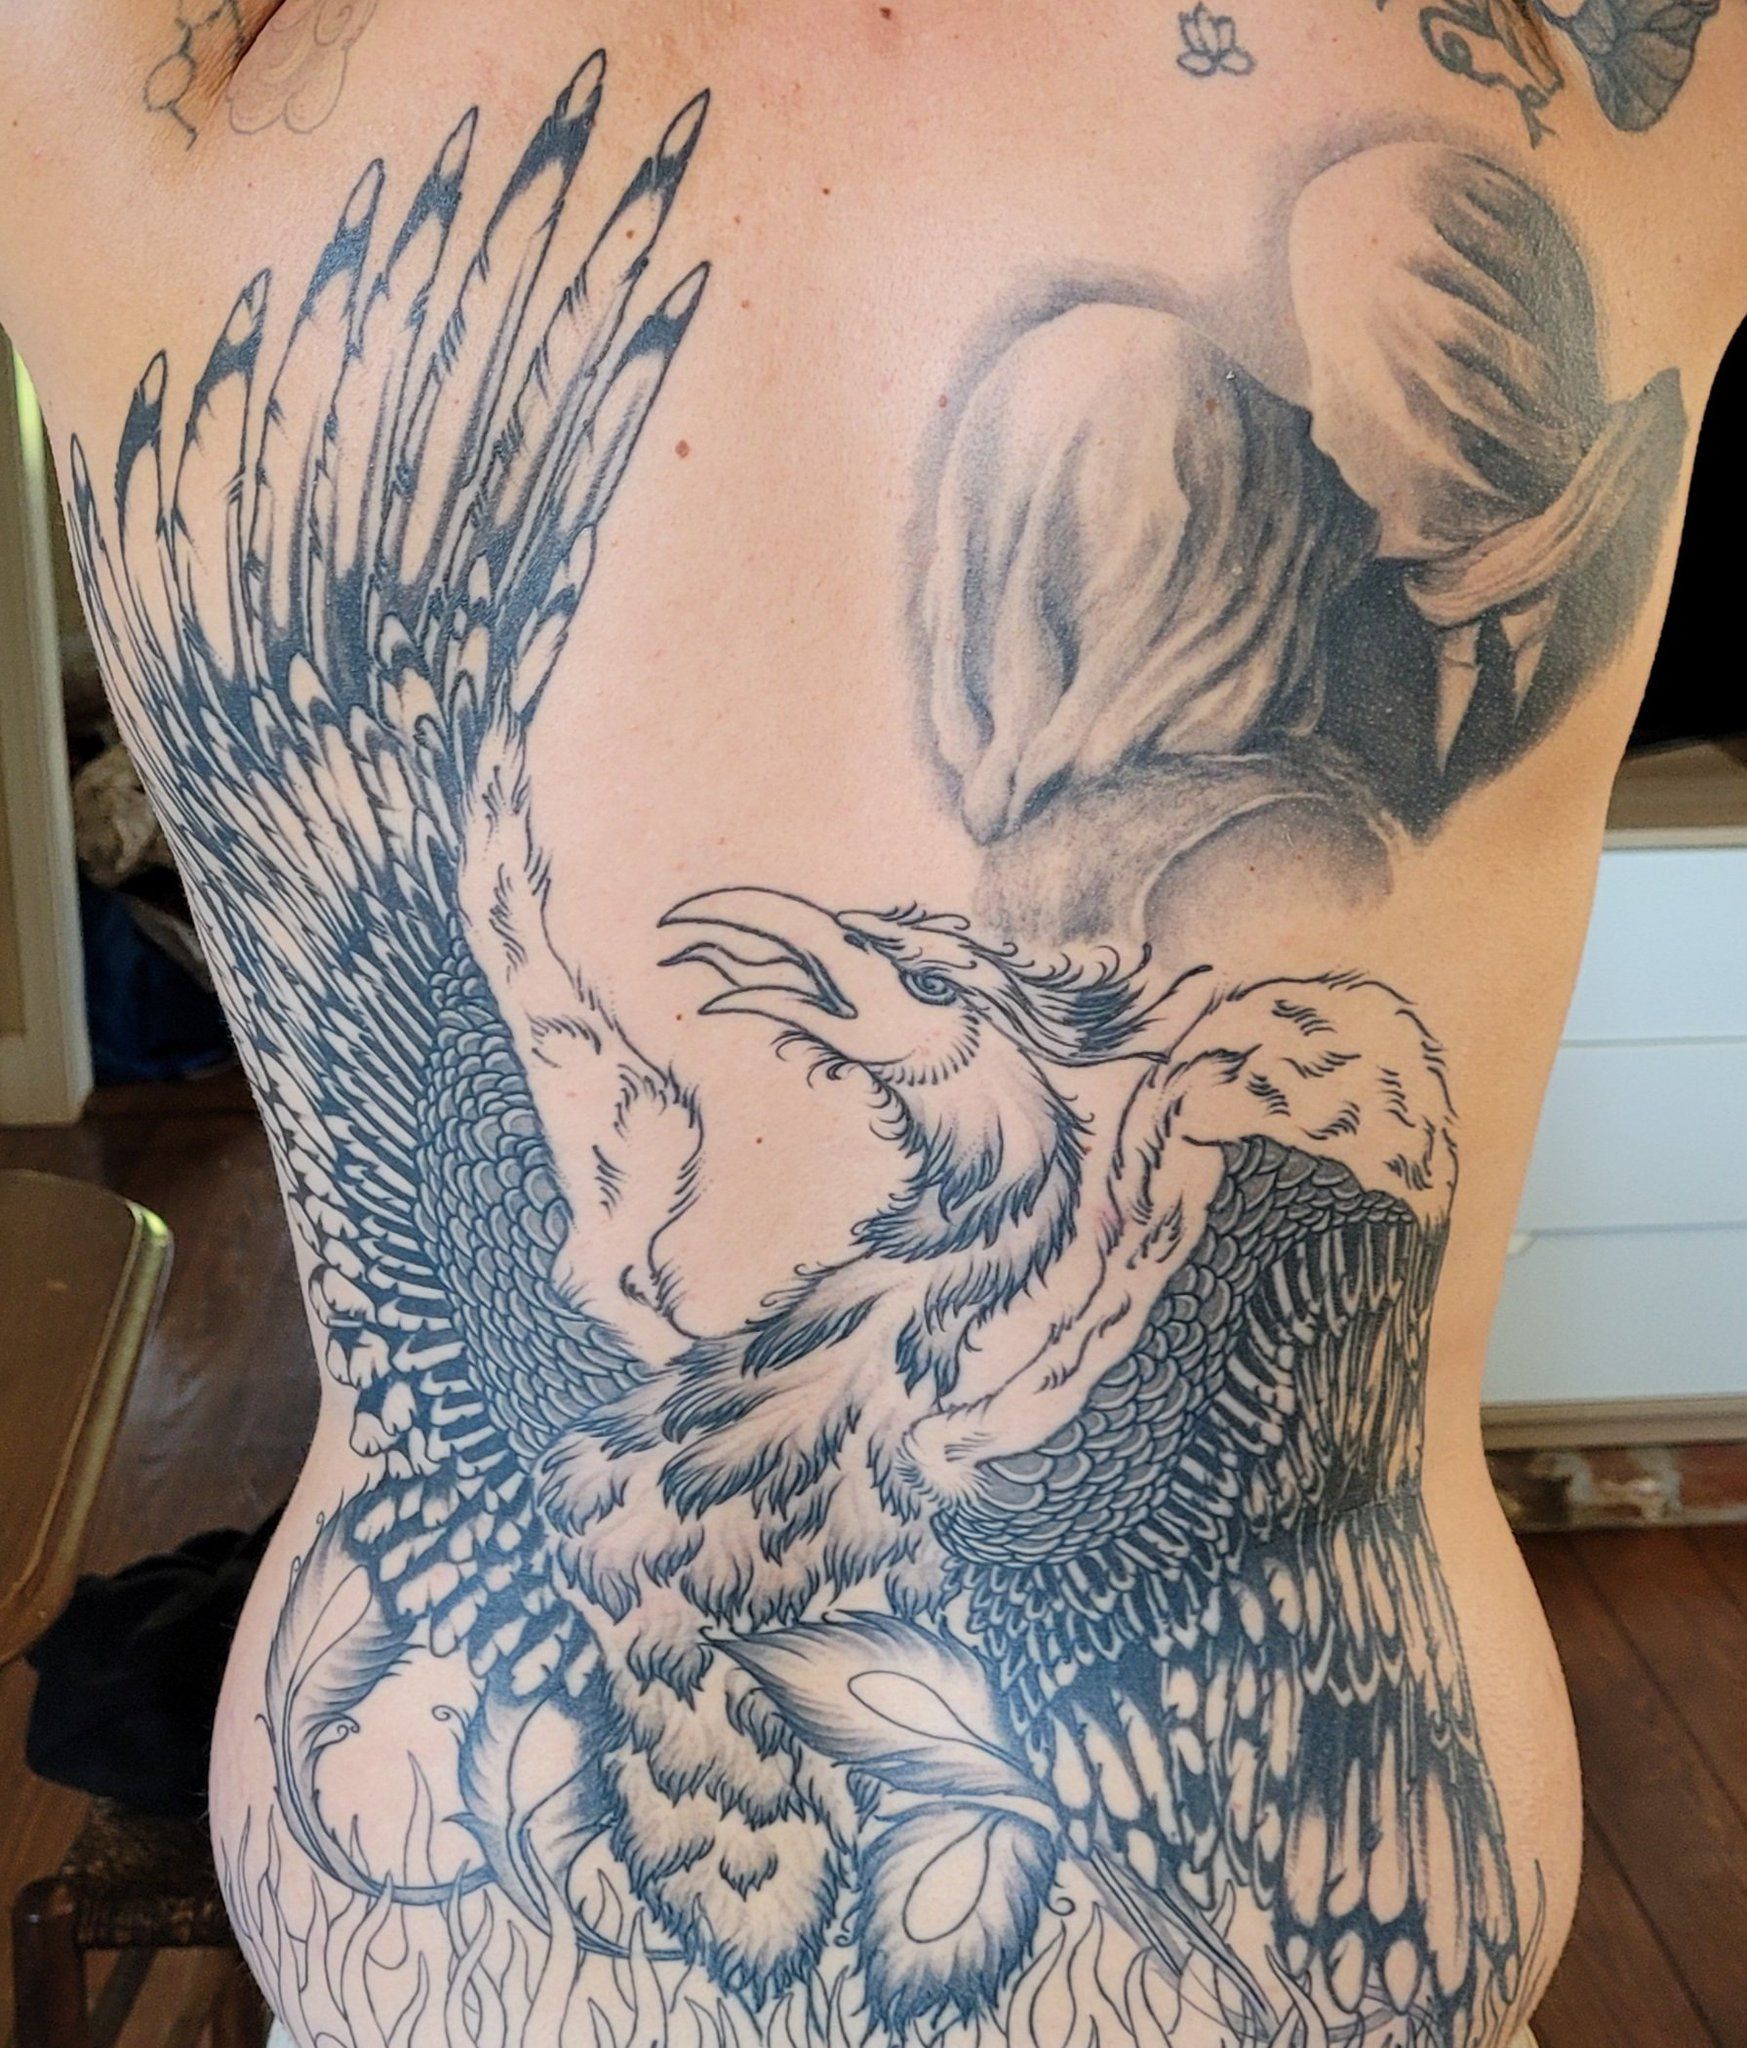 A detailed tattoo of a phoenix covering a person's back